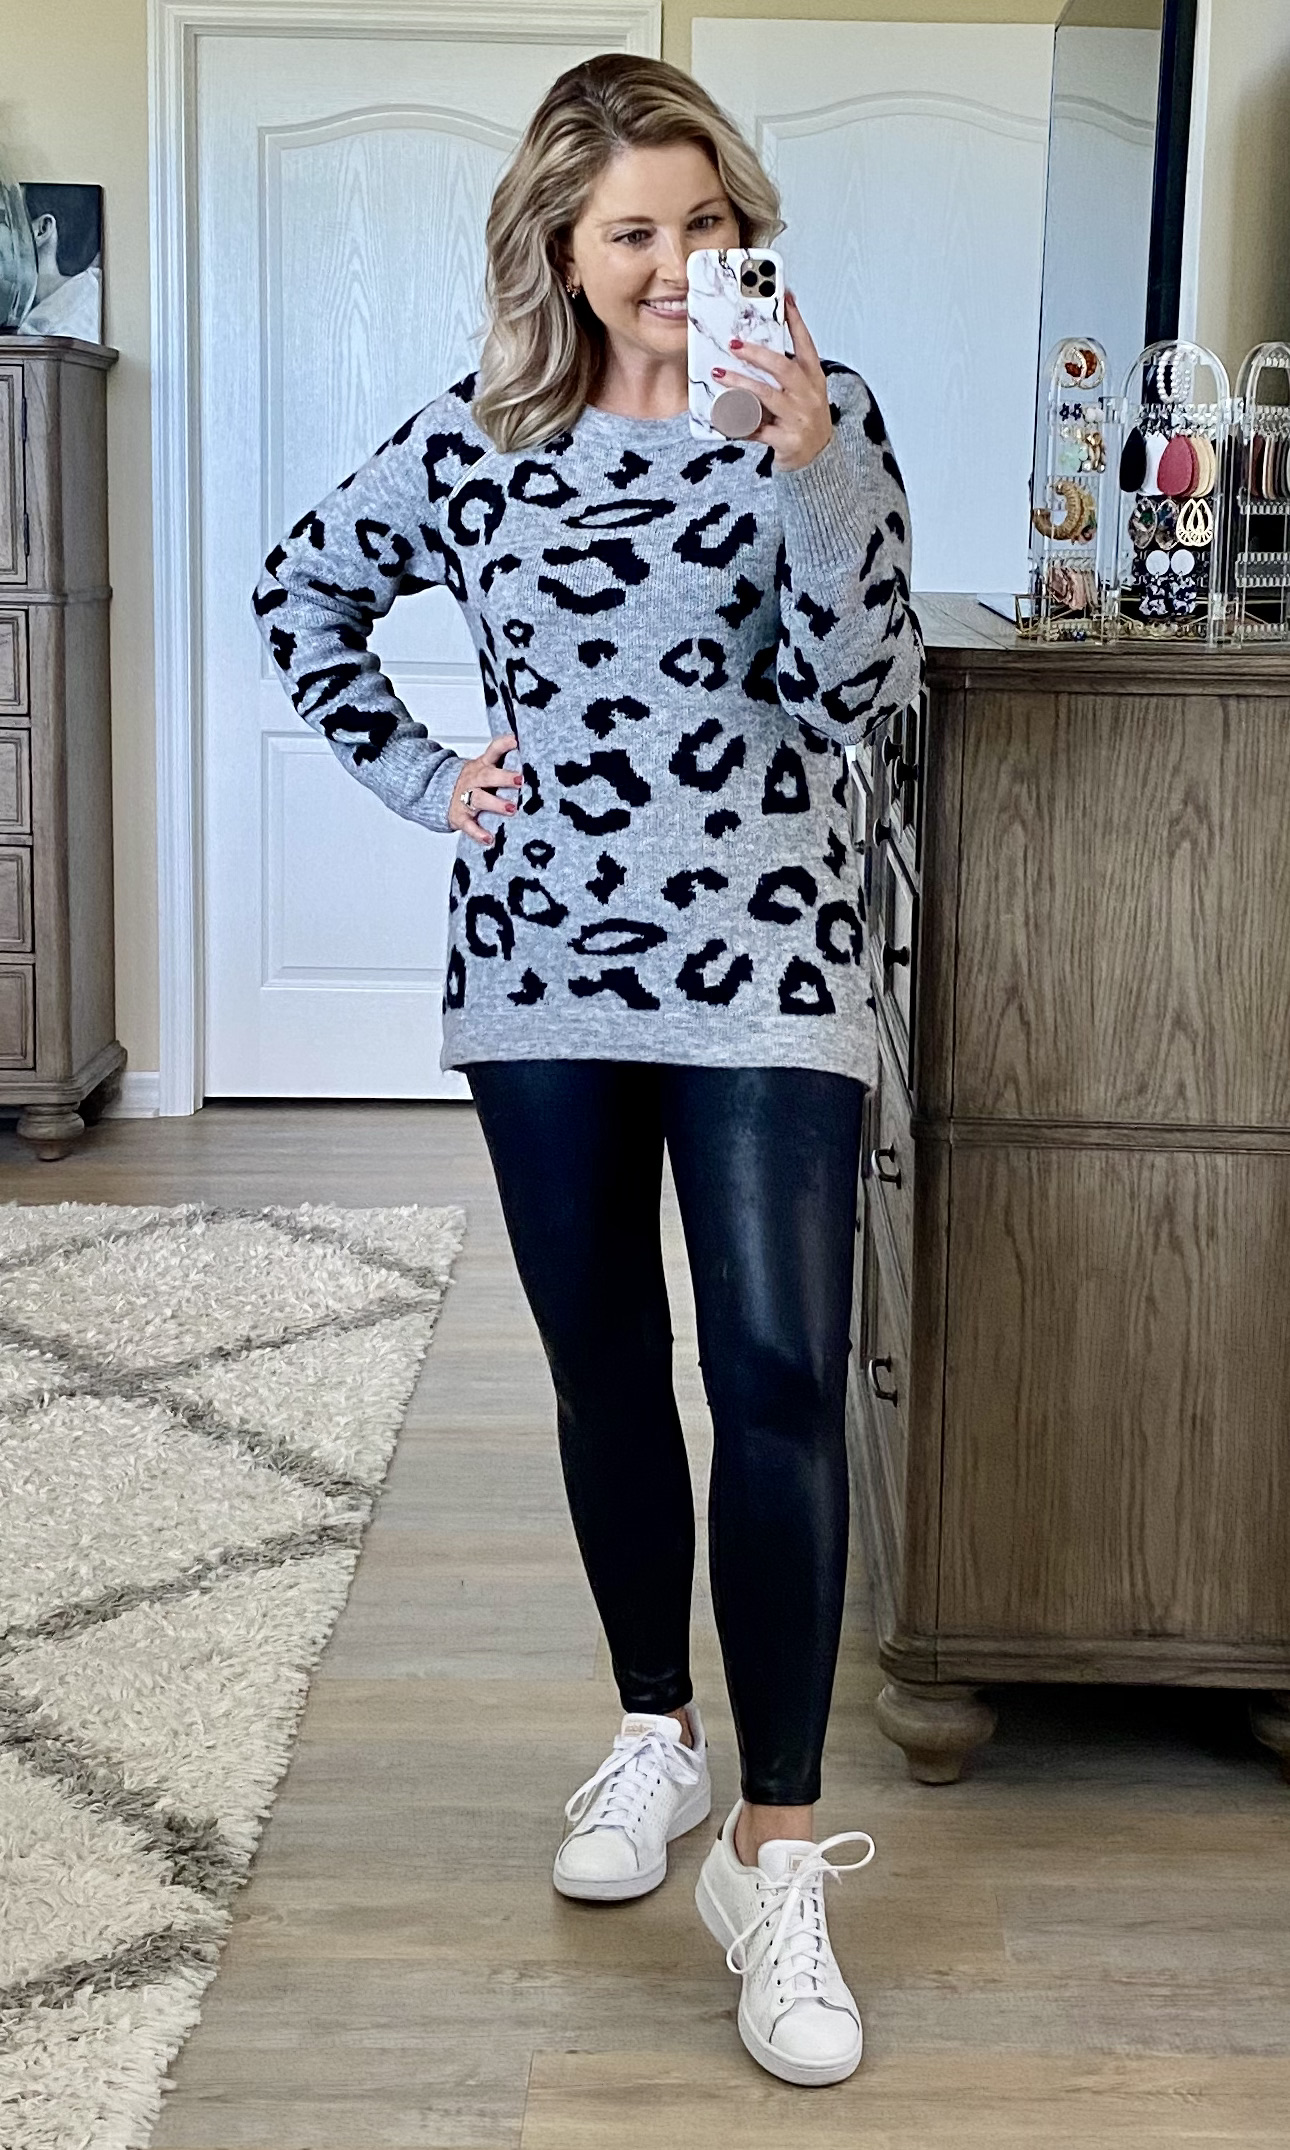 Abercrombie & Fitch side zip leopard sweater, Spanx faux leather leggings, Adidas sneakers